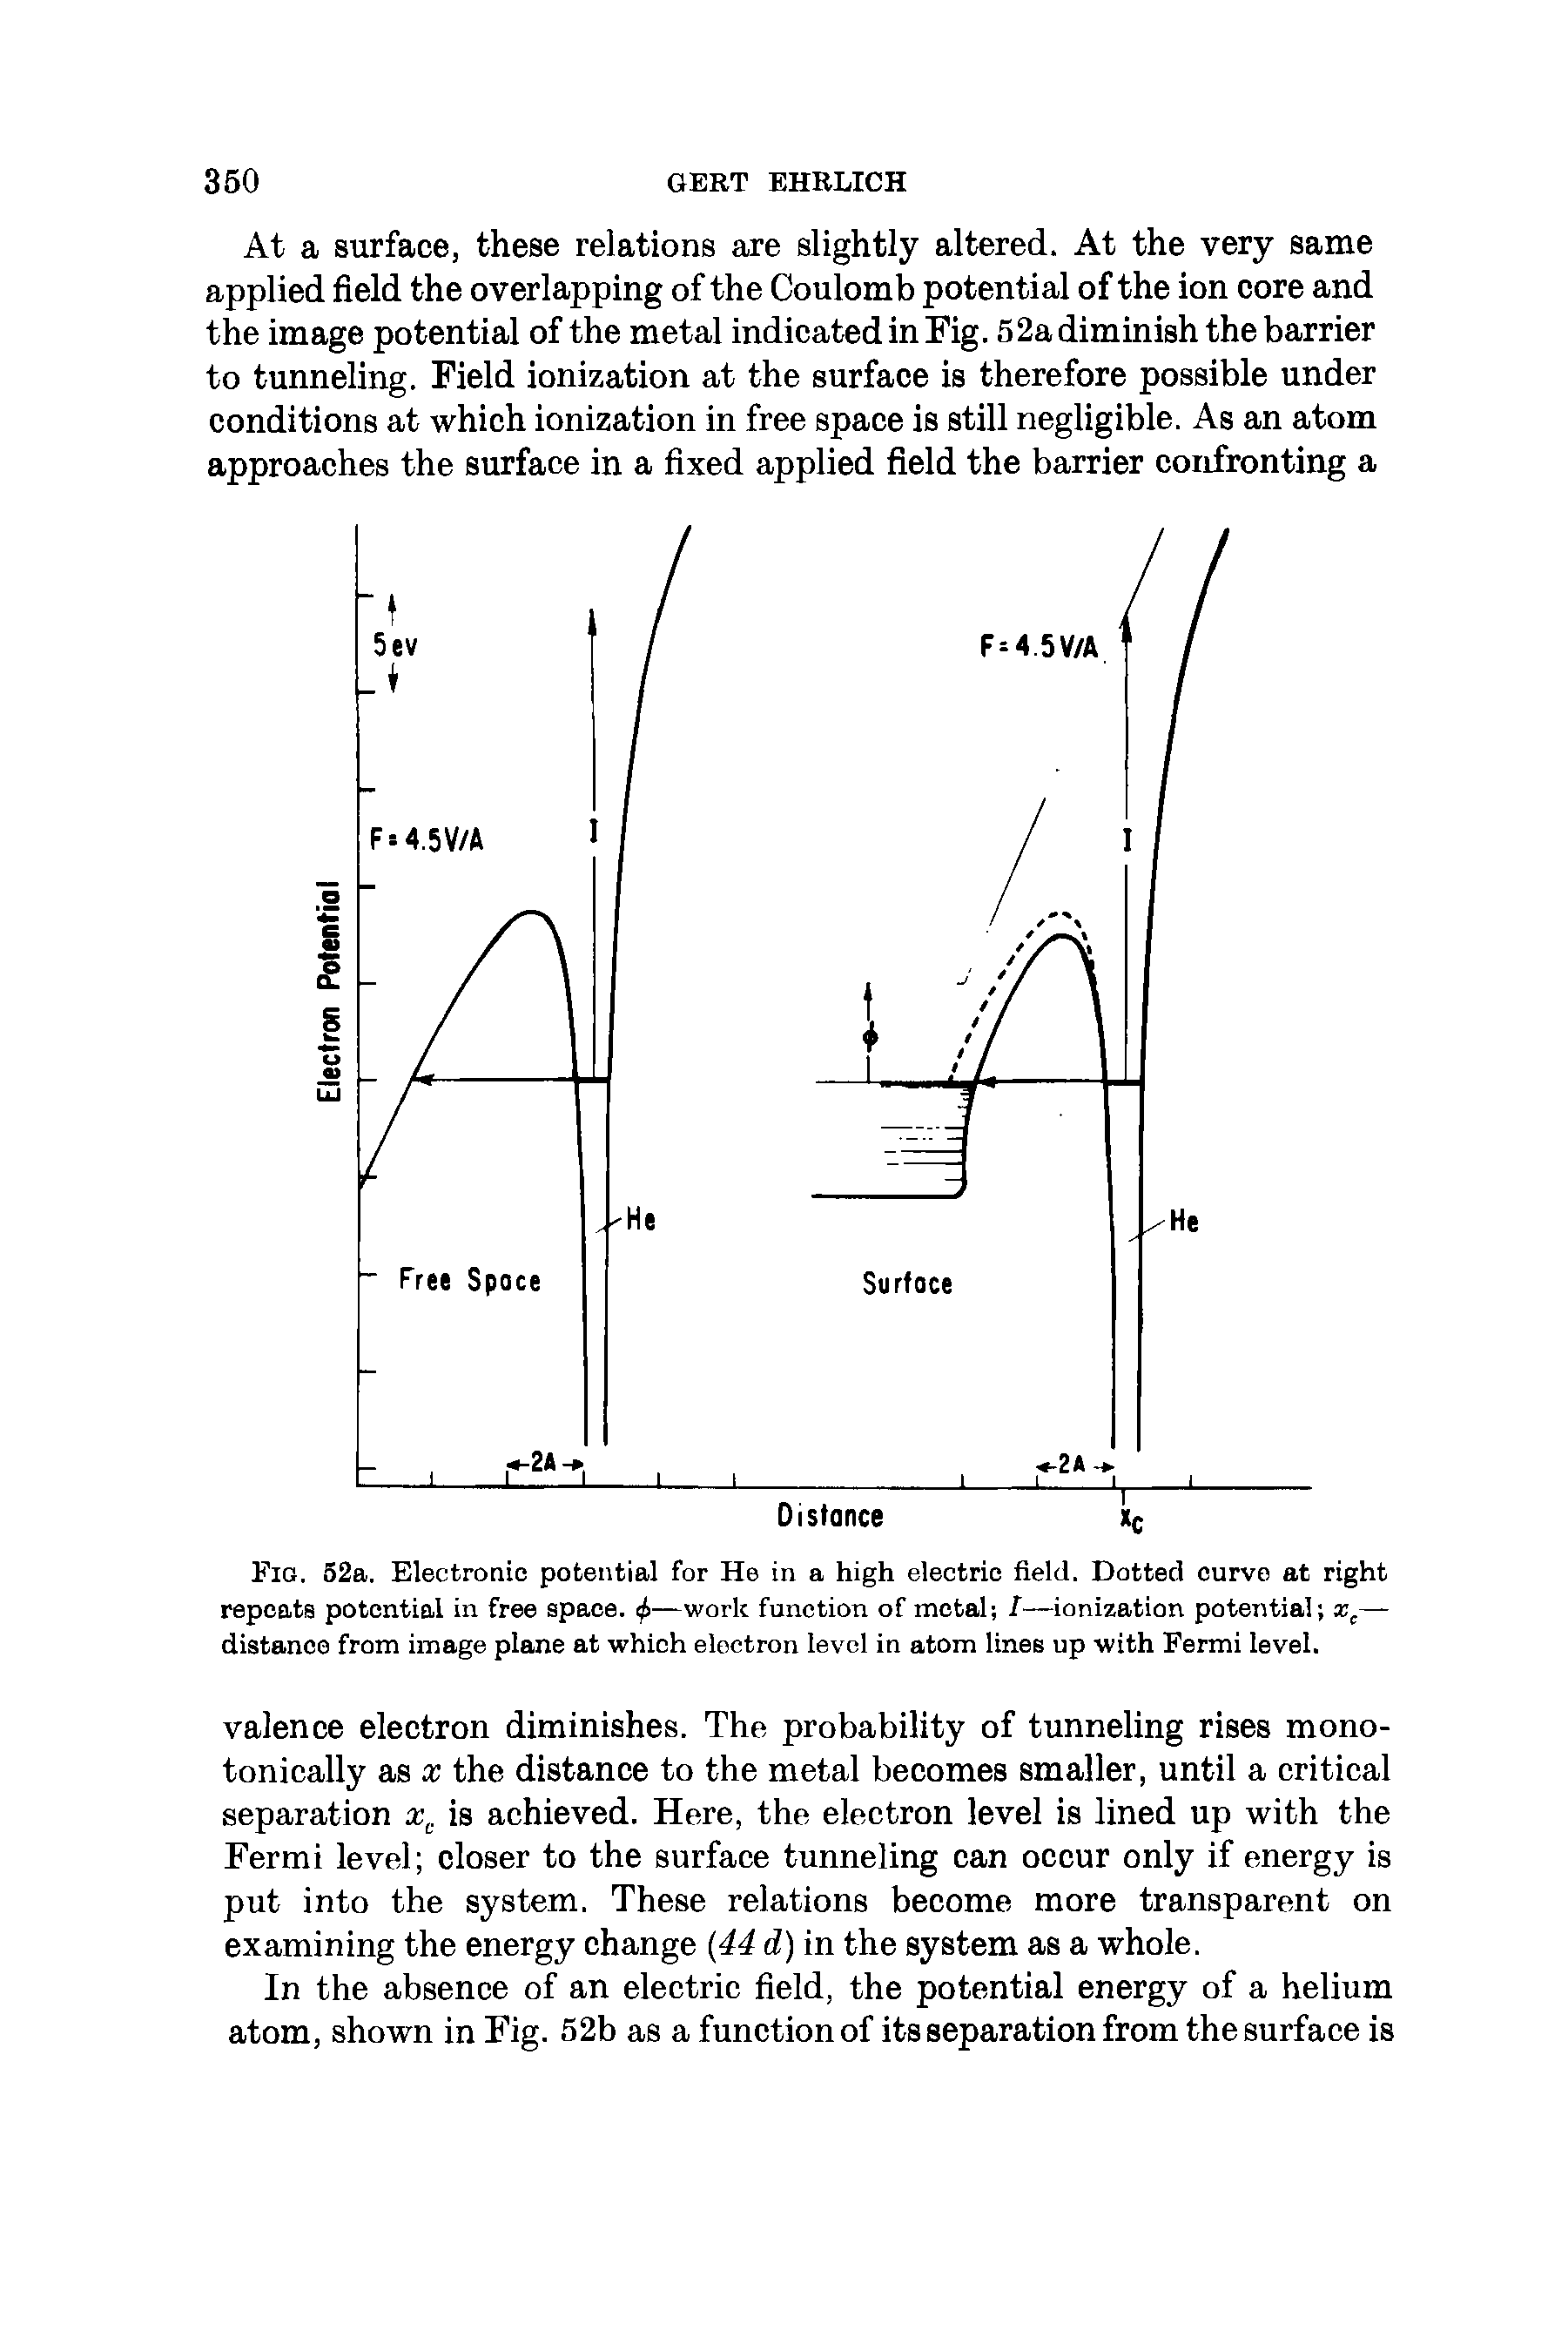 Fig. 52a. Electronic potential for He in a high electric field. Dotted curve at right repeats potential in free space. —work function of metal I—ionization potential xc— distance from image plane at which electron level in atom lines up with Fermi level.